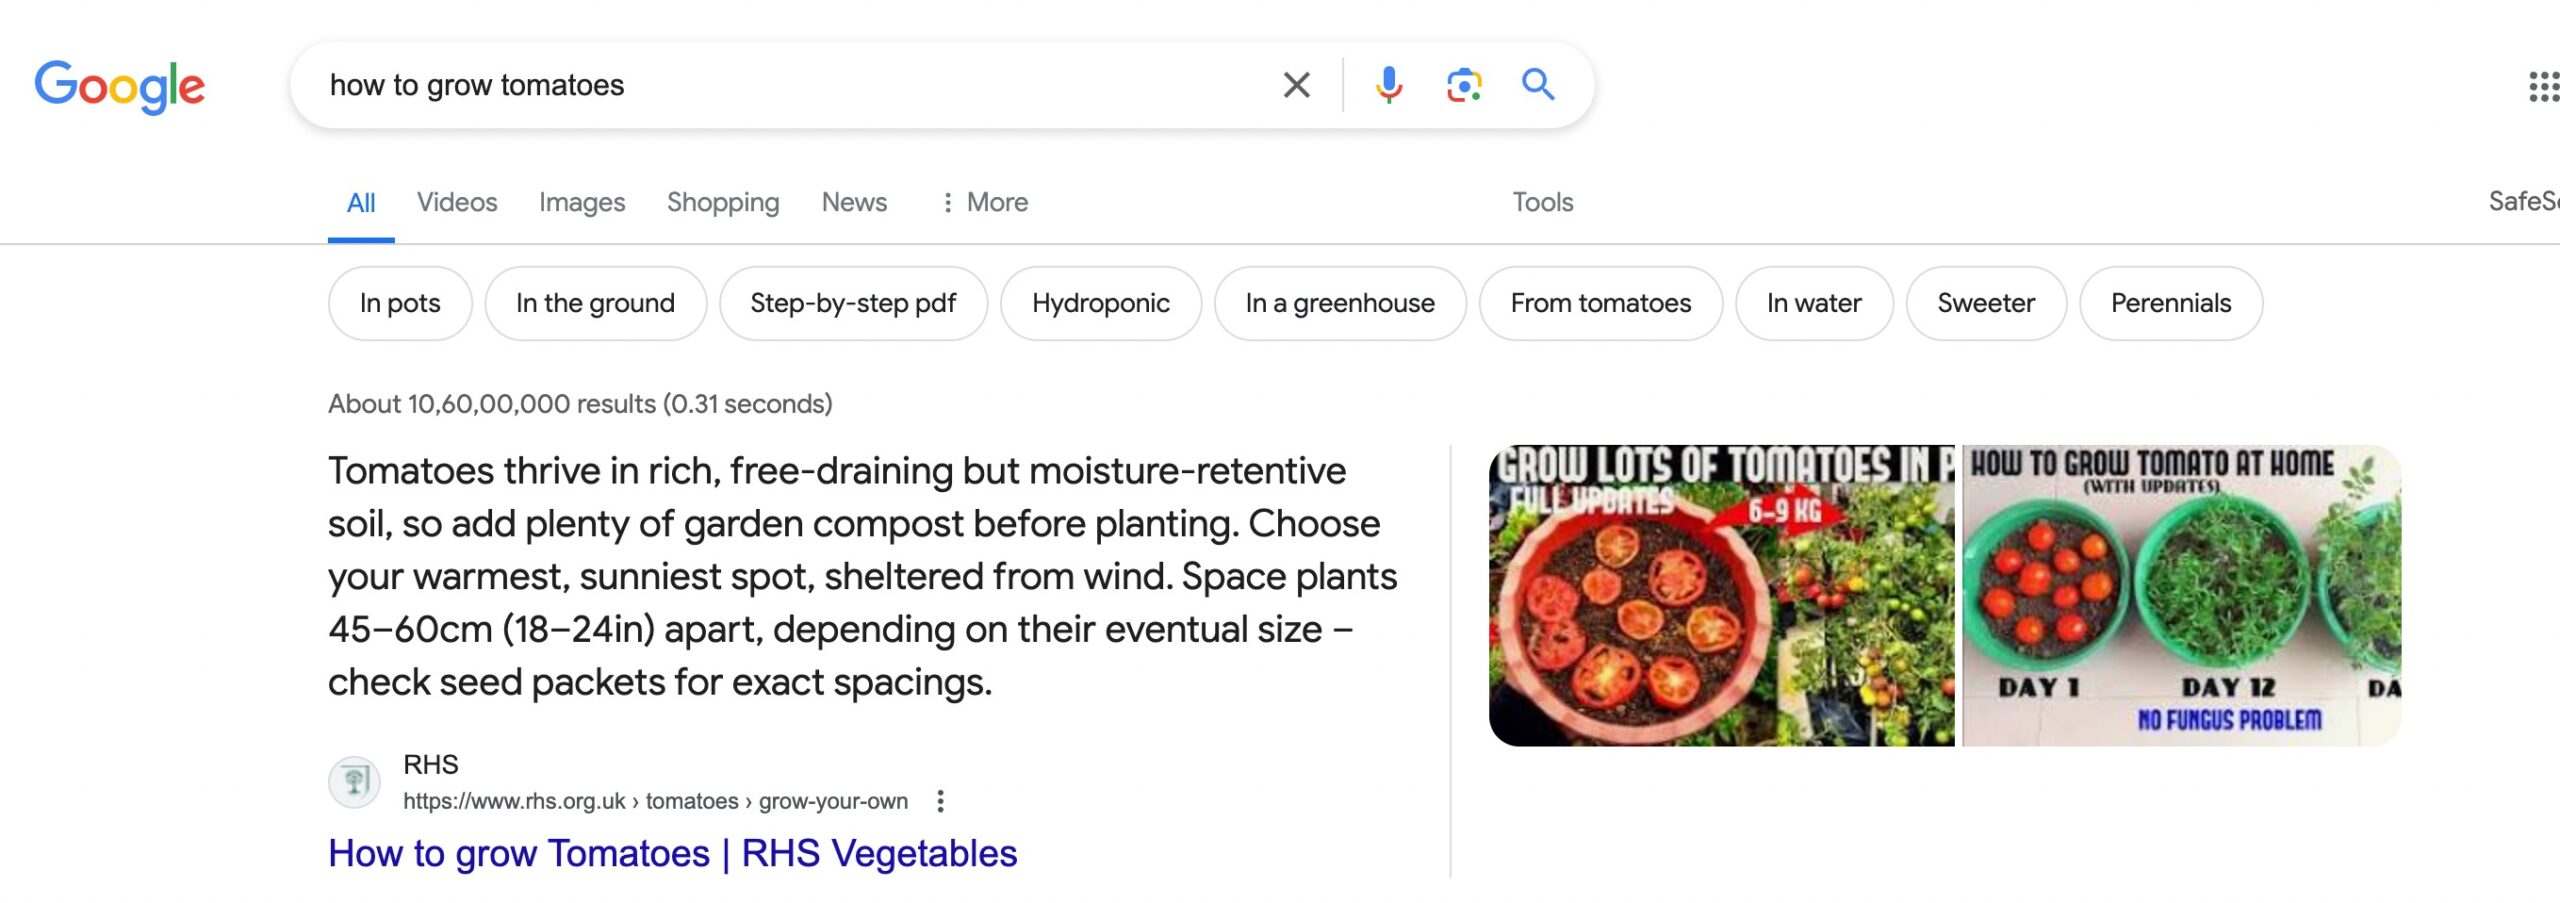 Featured Snippet example